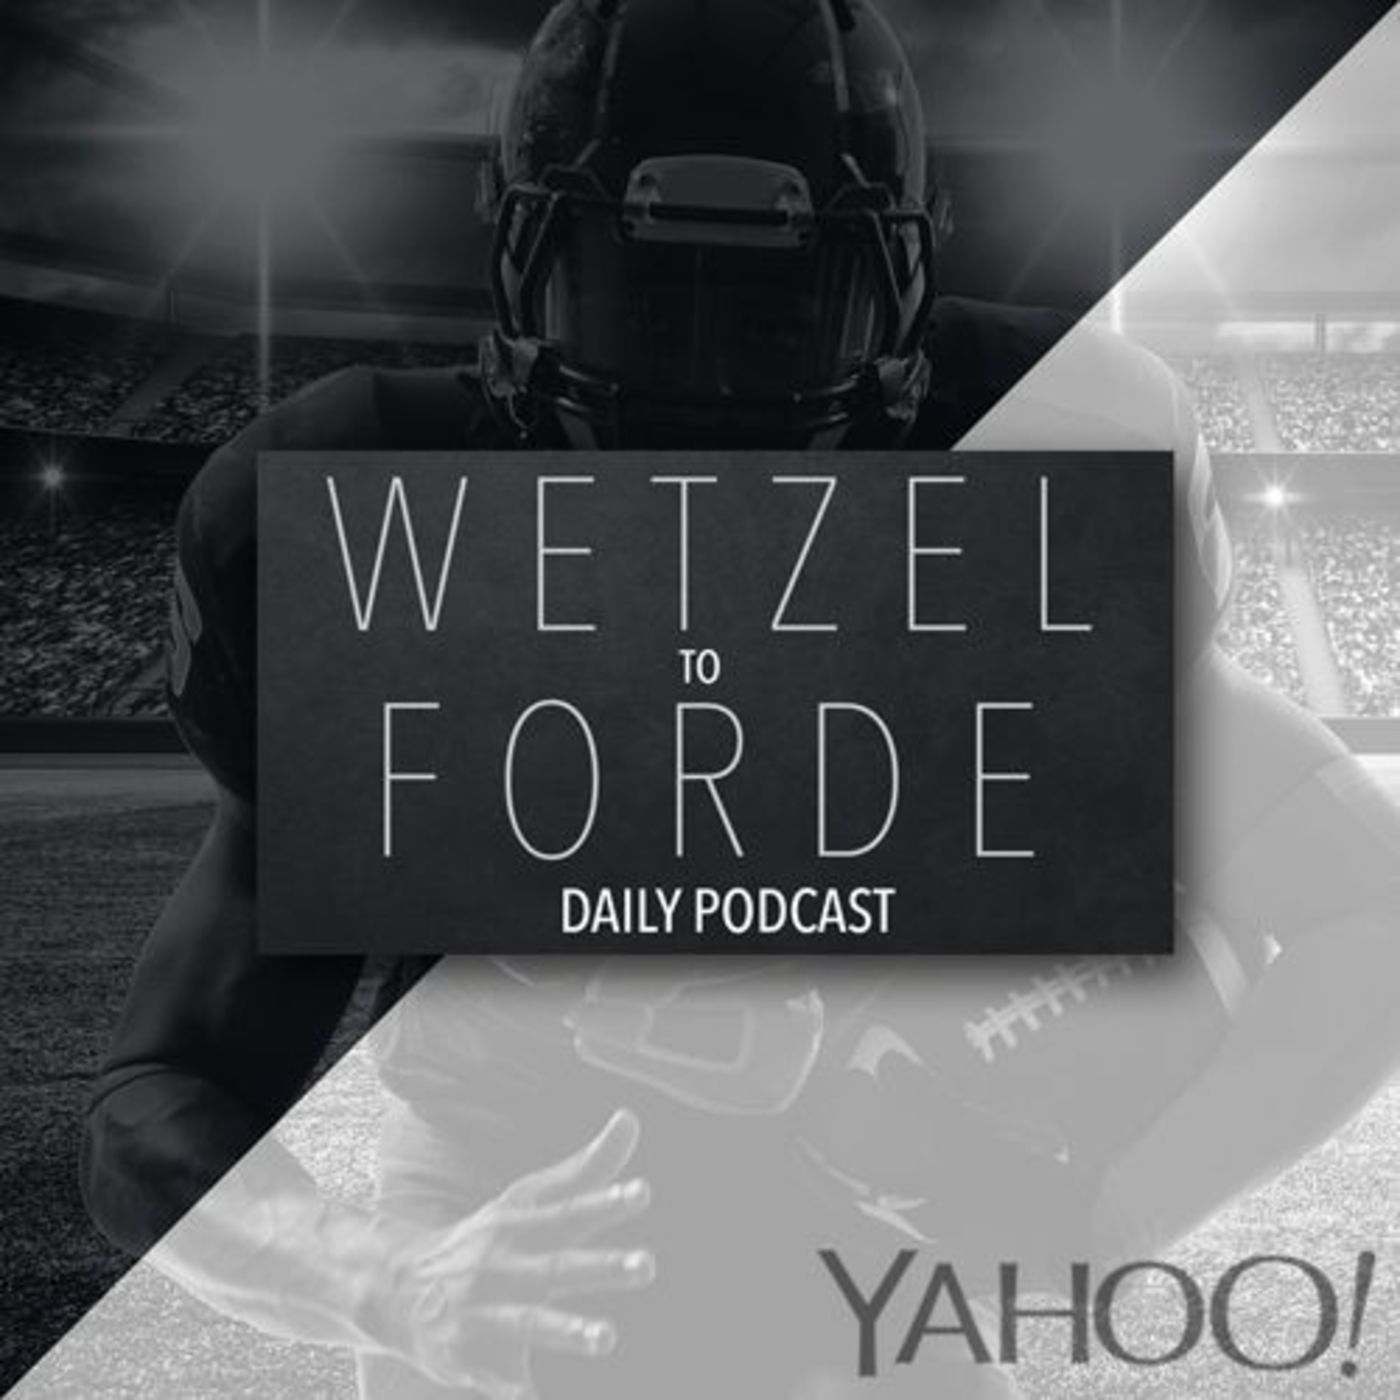 Ohio State falls apart, Elliott sounds off, who's in the playoff? Wetzel To Forde (11 - 23 - 15)